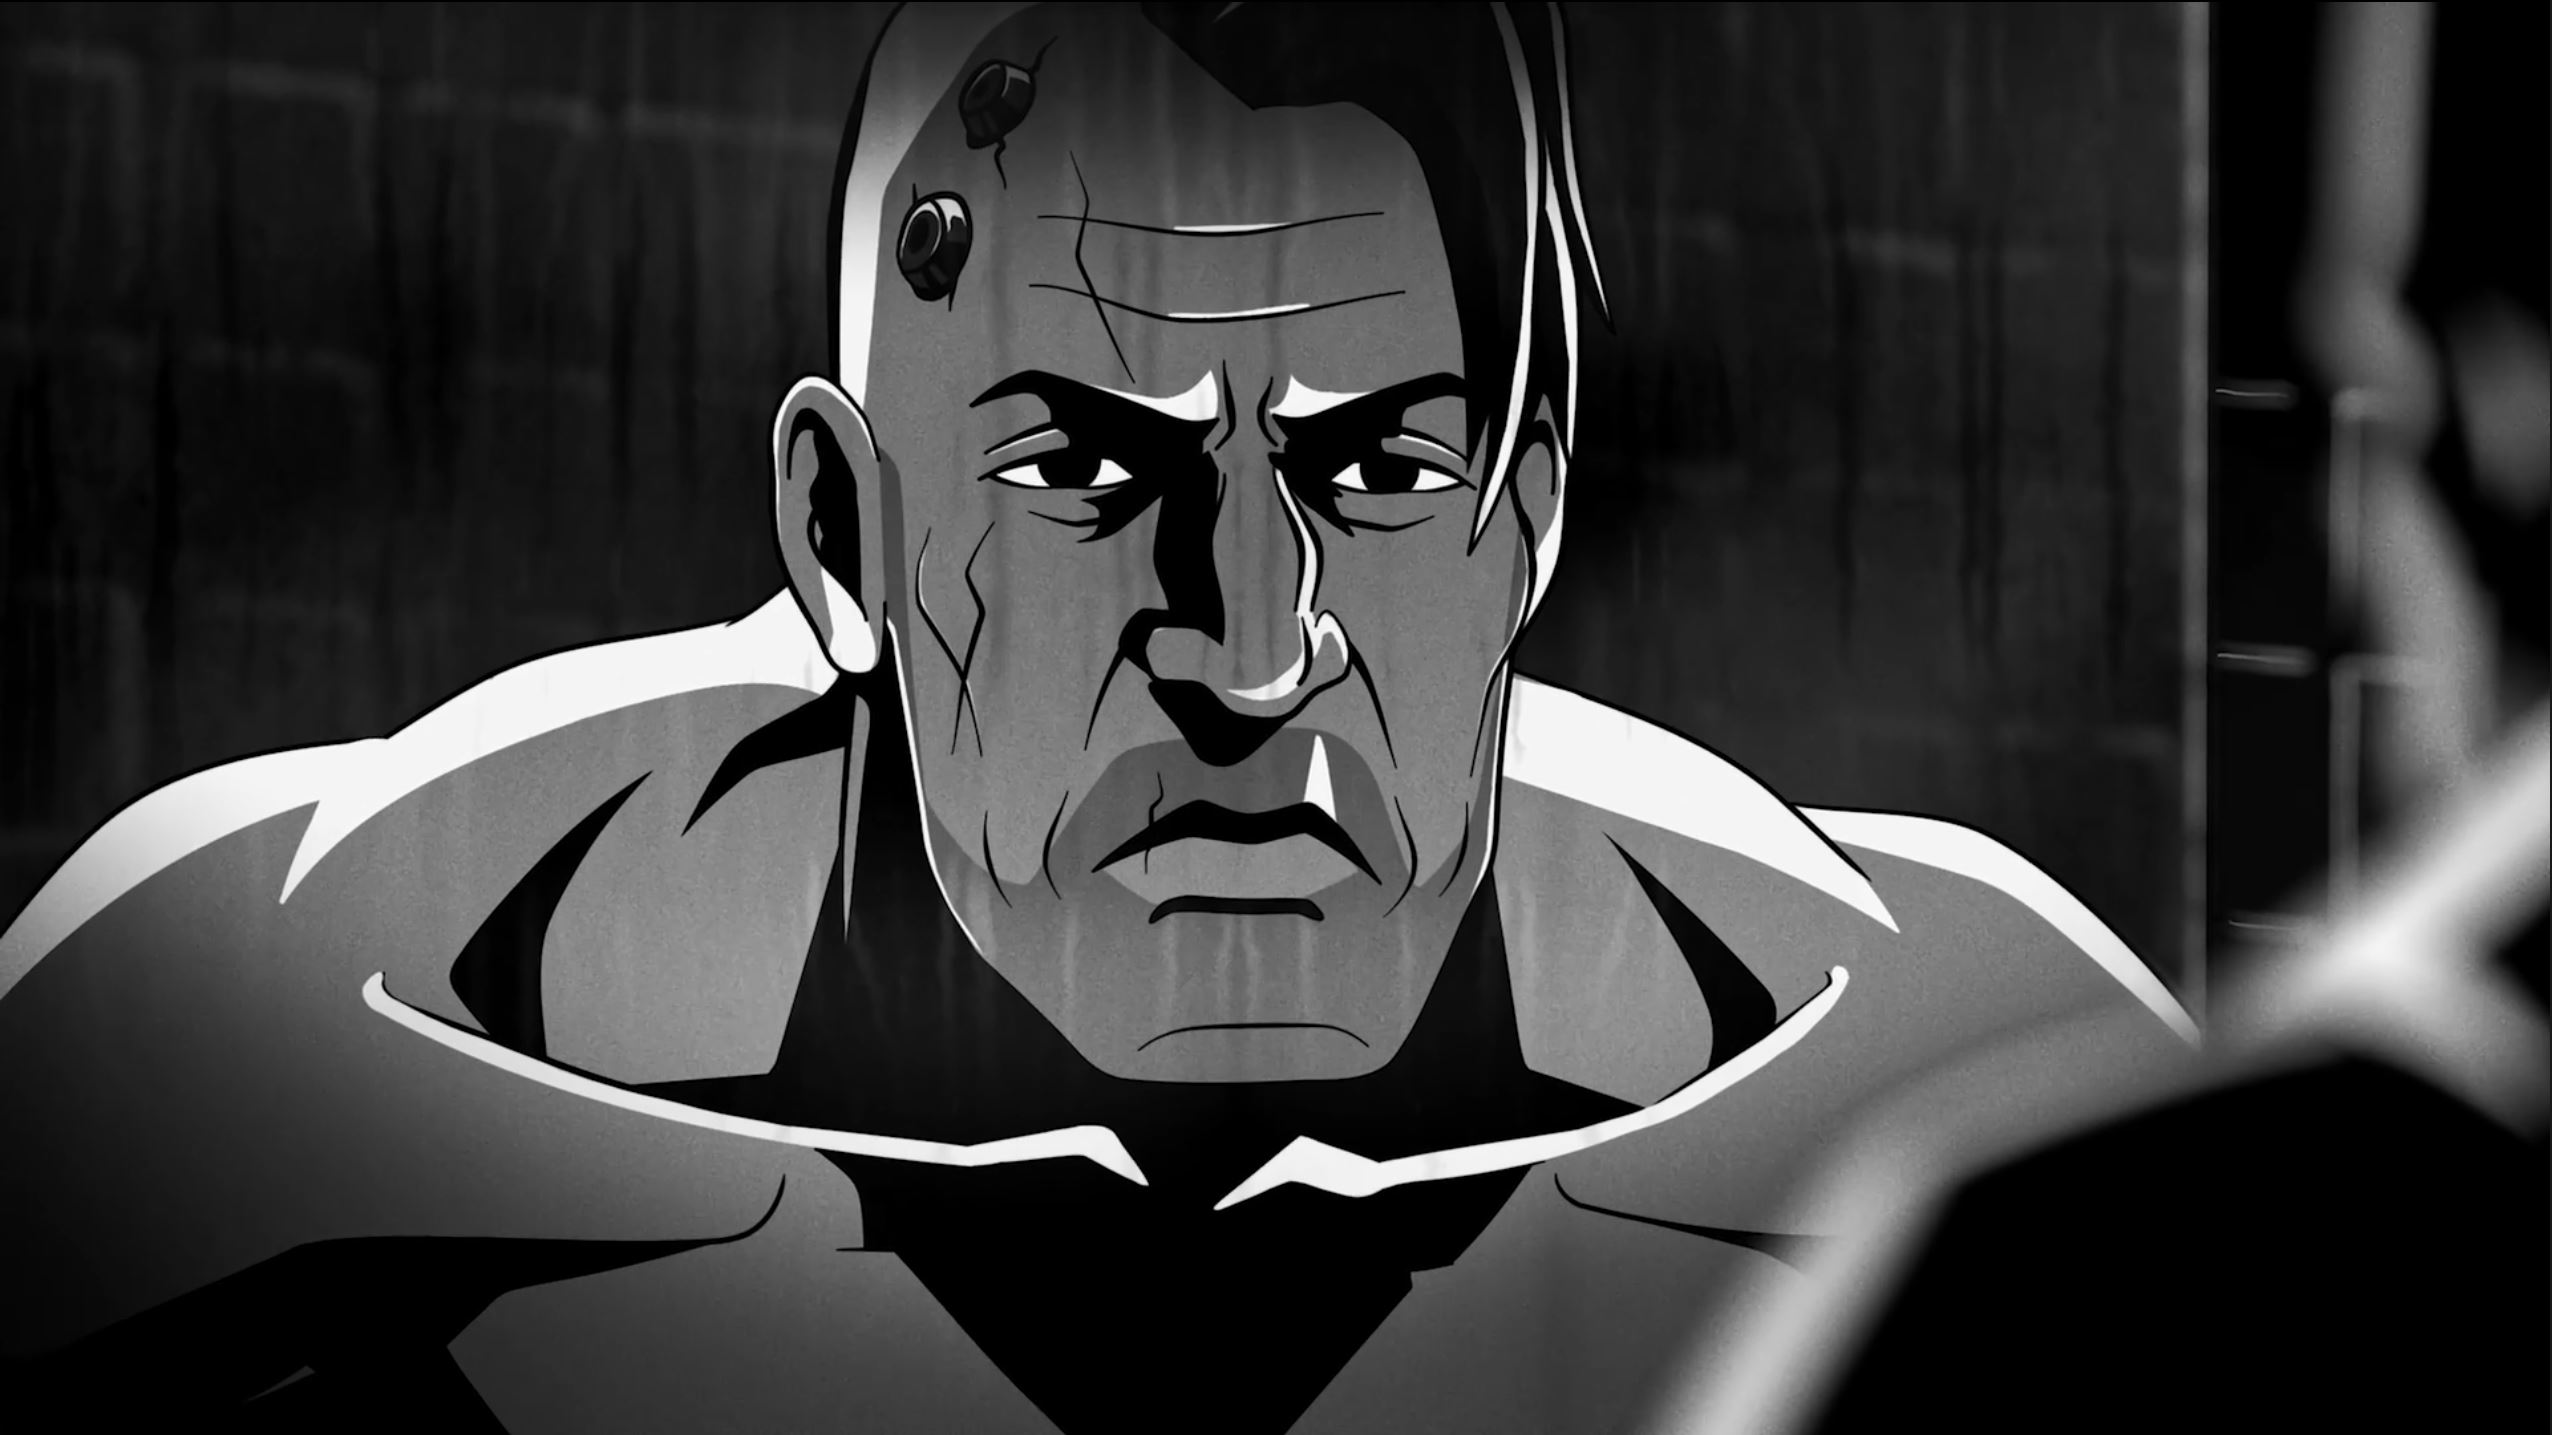 An inquisitor looking at himself in the mirror in Inquisitor, a feature-length animated film available on Warhammer TV — part of the Warhammer Plus subscription service.